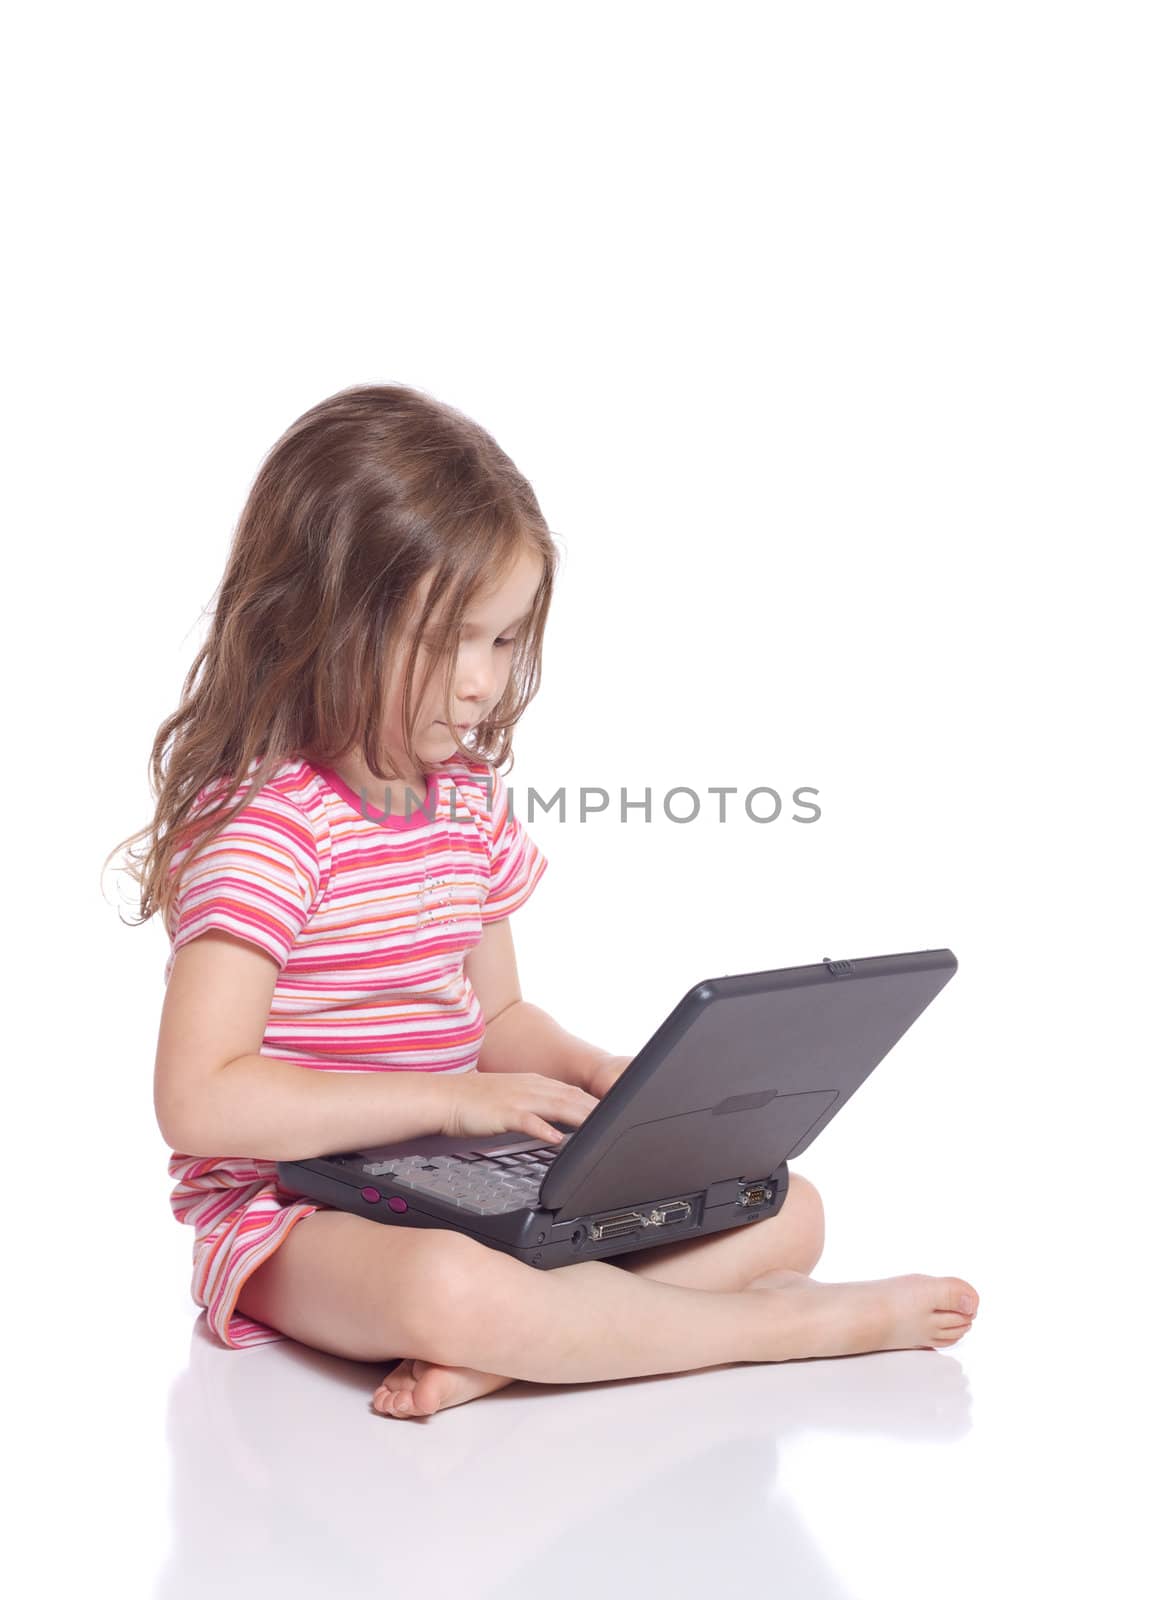 Cute little girl siting with a laptop